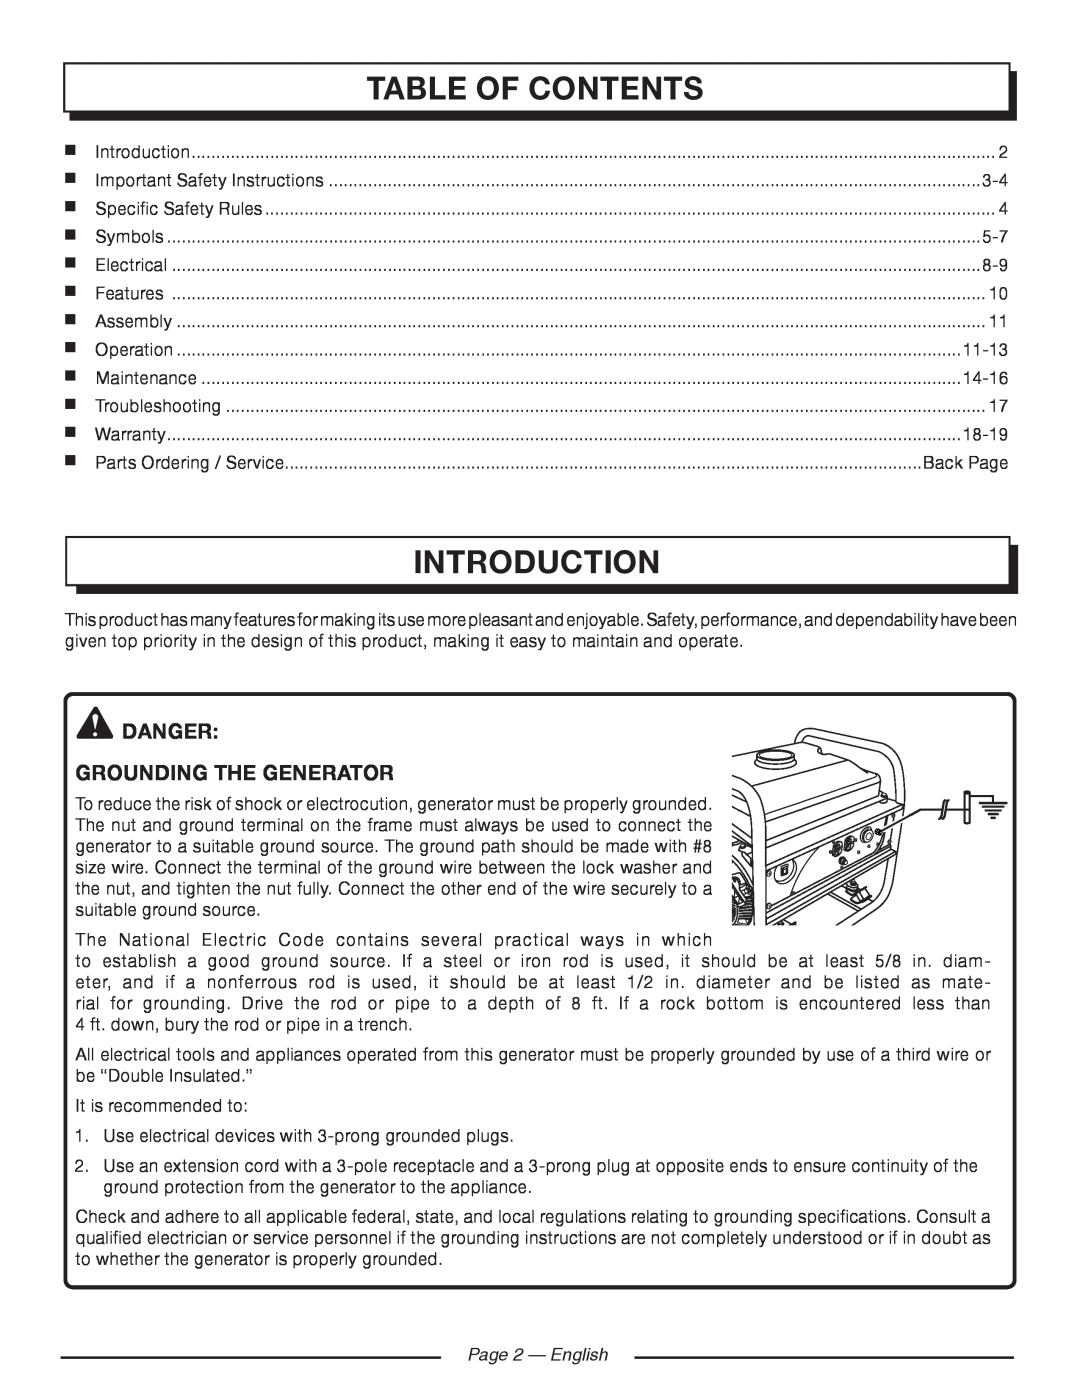 Homelite HGCA1400 manuel dutilisation Introduction, Table Of Contents, danger Grounding the Generator, Page 2 - English 